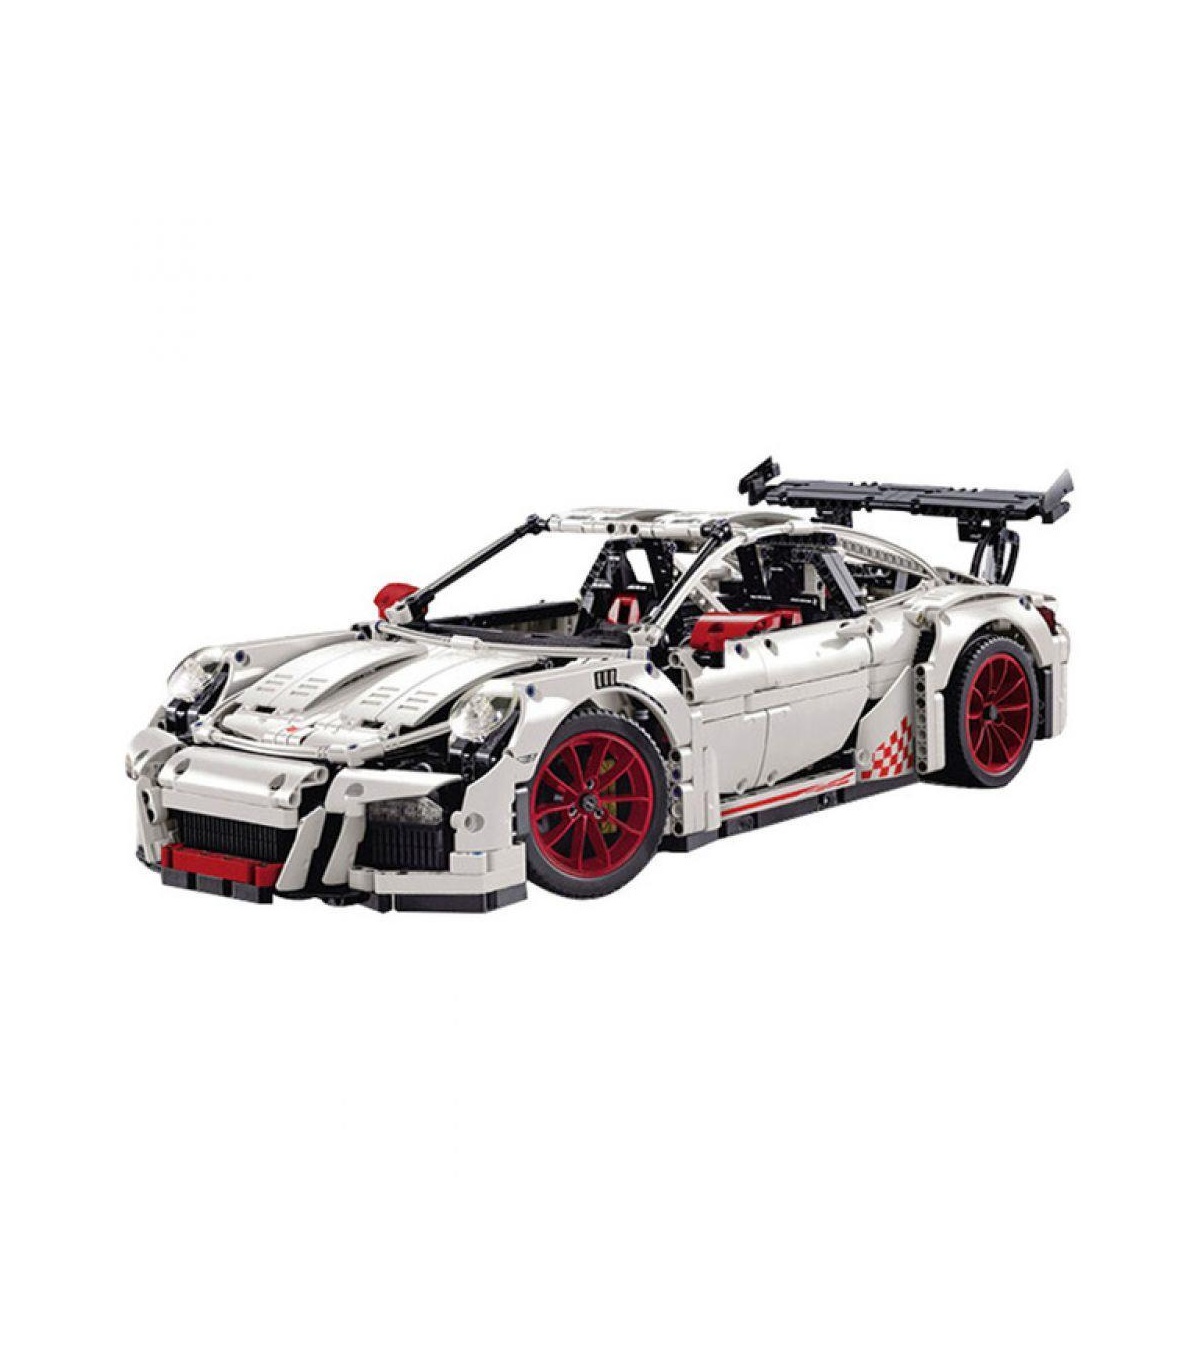 See Why the Porsche 911 GT3 RS Lego Technic Kit is for Ages 16+